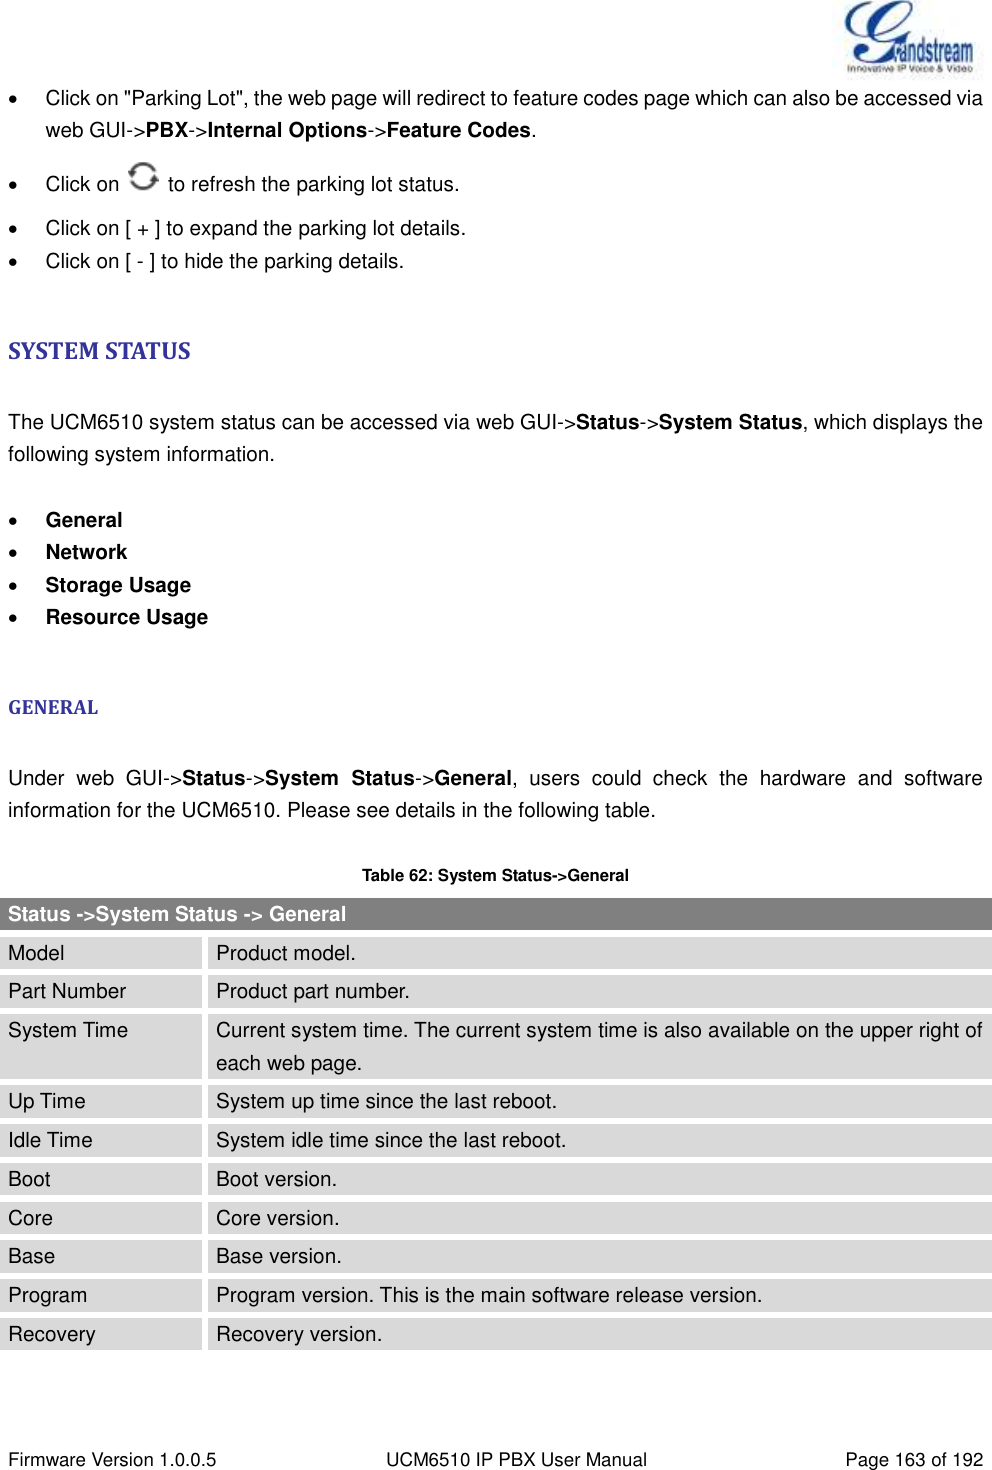  Firmware Version 1.0.0.5 UCM6510 IP PBX User Manual Page 163 of 192    Click on &quot;Parking Lot&quot;, the web page will redirect to feature codes page which can also be accessed via web GUI-&gt;PBX-&gt;Internal Options-&gt;Feature Codes.   Click on    to refresh the parking lot status.   Click on [ + ] to expand the parking lot details.   Click on [ - ] to hide the parking details.  SYSTEM STATUS  The UCM6510 system status can be accessed via web GUI-&gt;Status-&gt;System Status, which displays the following system information.   General  Network  Storage Usage  Resource Usage  GENERAL  Under  web  GUI-&gt;Status-&gt;System  Status-&gt;General,  users  could  check  the  hardware  and  software information for the UCM6510. Please see details in the following table.  Table 62: System Status-&gt;General Status -&gt;System Status -&gt; General Model Product model. Part Number Product part number. System Time Current system time. The current system time is also available on the upper right of each web page. Up Time System up time since the last reboot. Idle Time System idle time since the last reboot. Boot Boot version. Core Core version. Base Base version. Program Program version. This is the main software release version. Recovery Recovery version.  